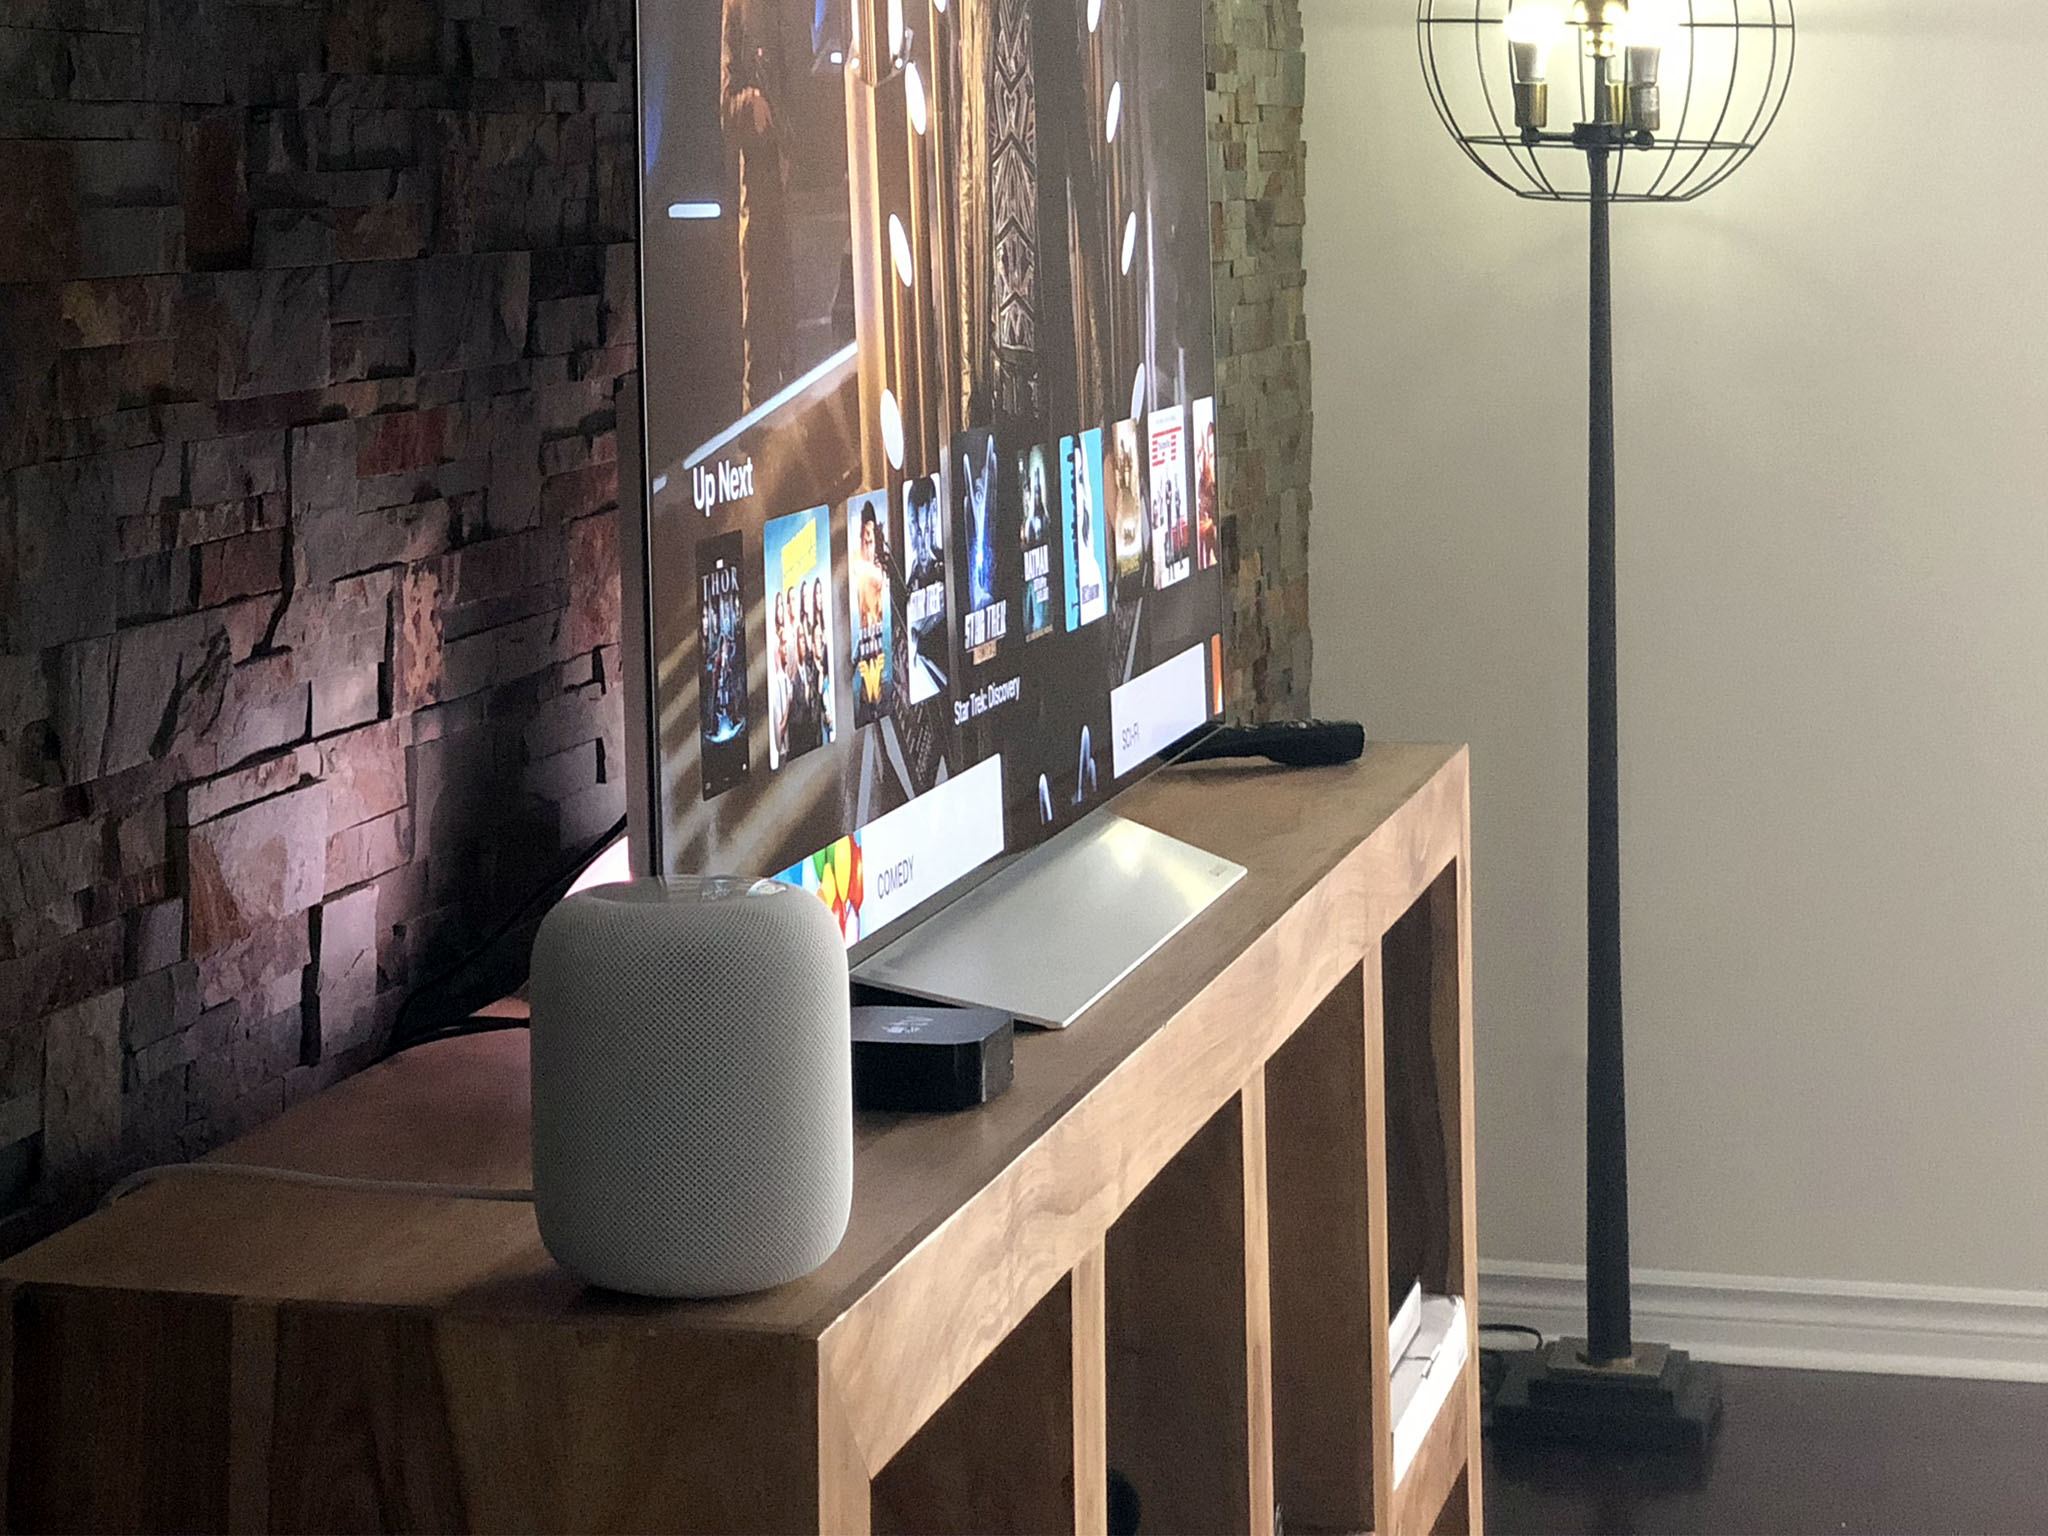 HomePod and Apple TV